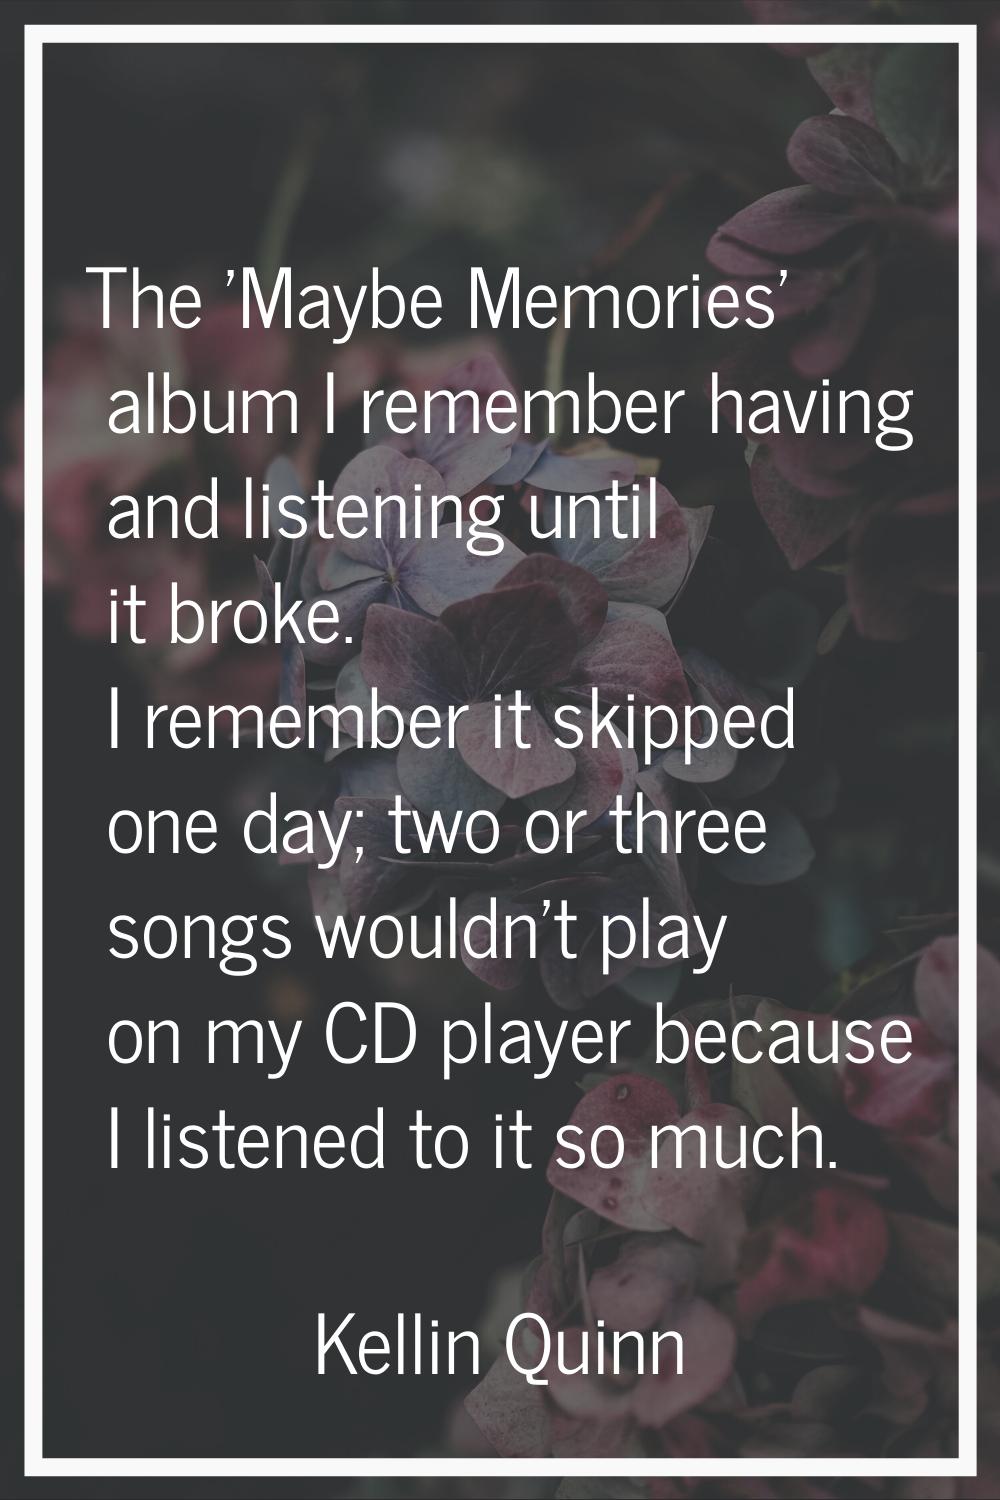 The 'Maybe Memories' album I remember having and listening until it broke. I remember it skipped on